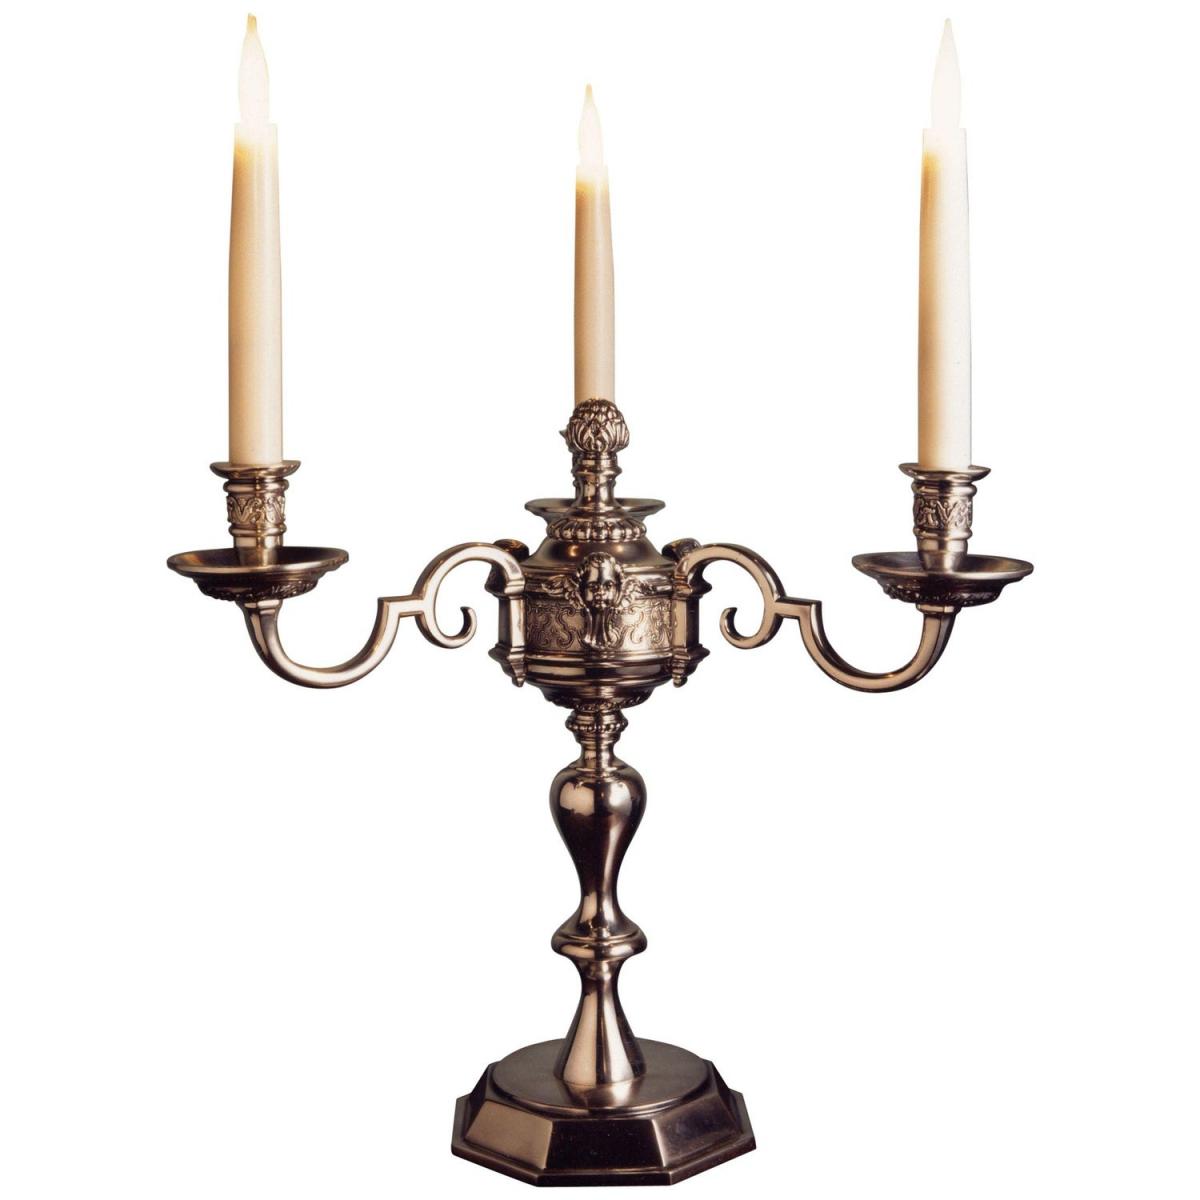 Candelabra, late-20th century, silver-plated, recreated from Knole chandelier